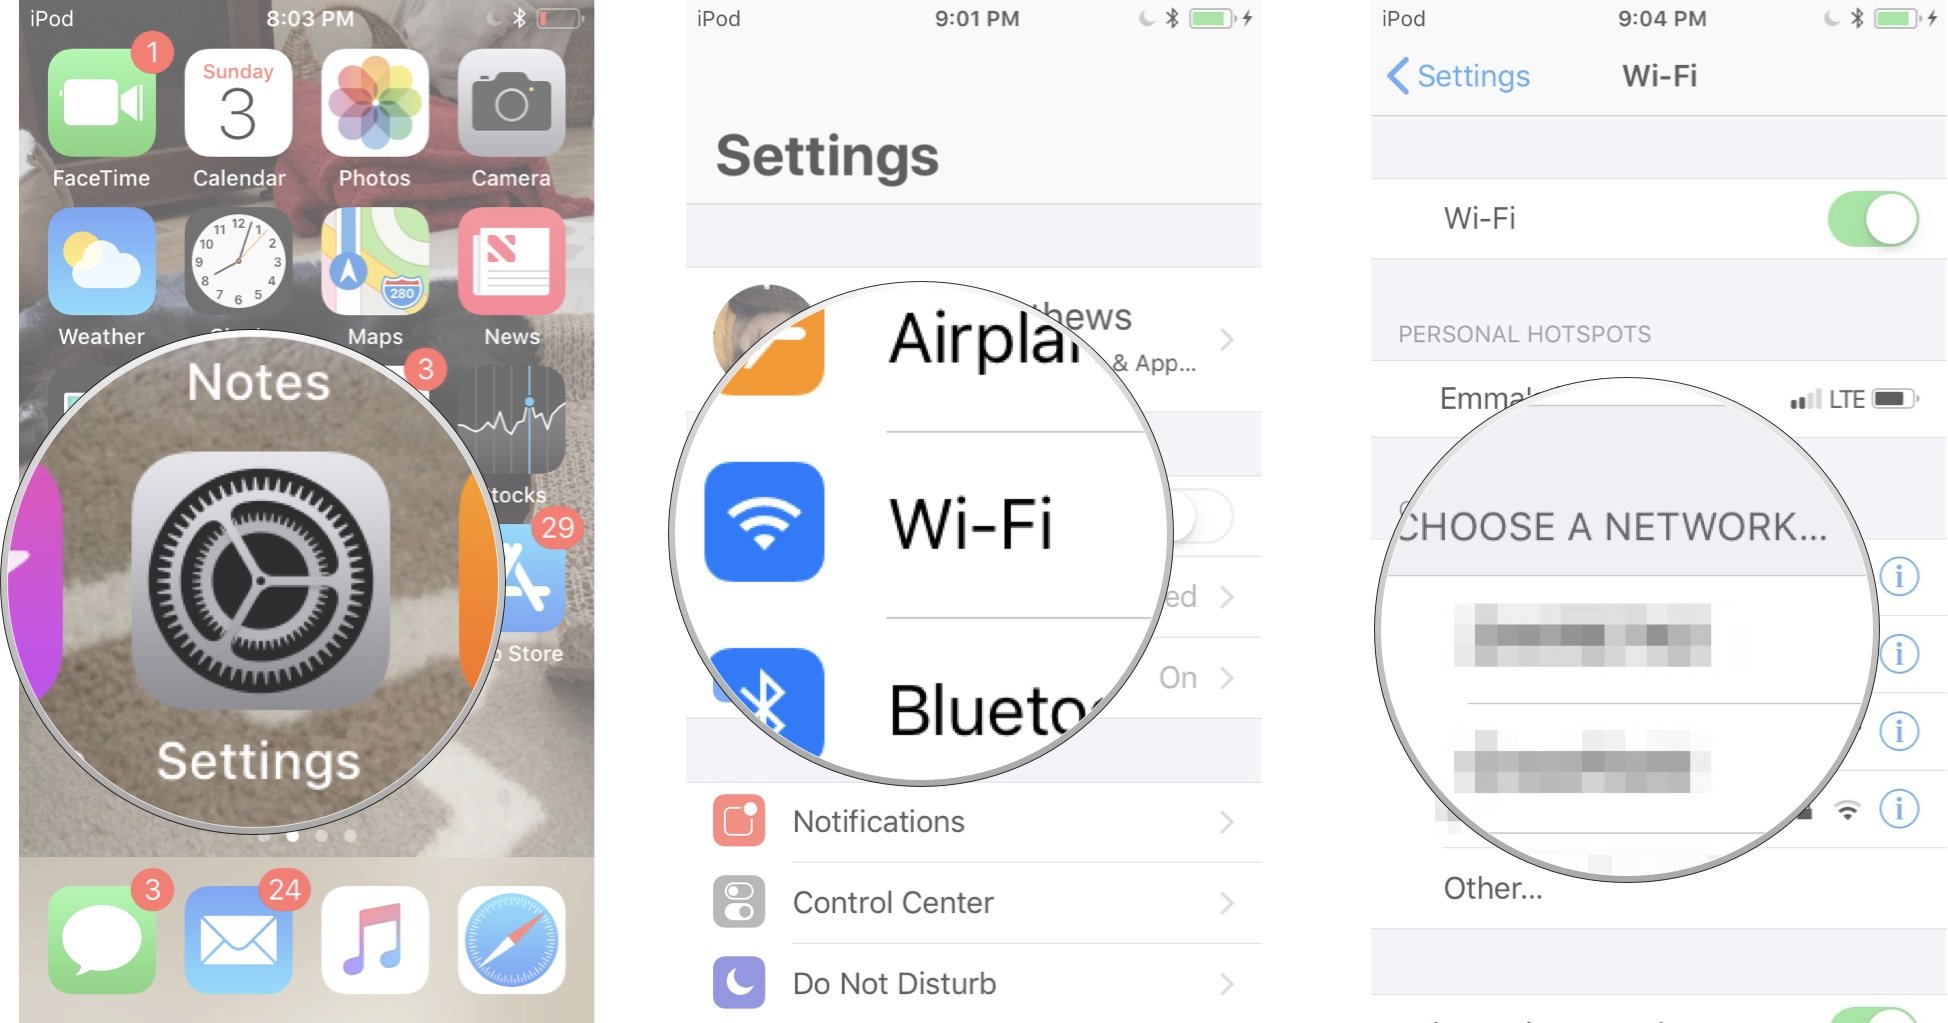 Tap Settings then tap Wi-Fi, then select the Wi-Fi network